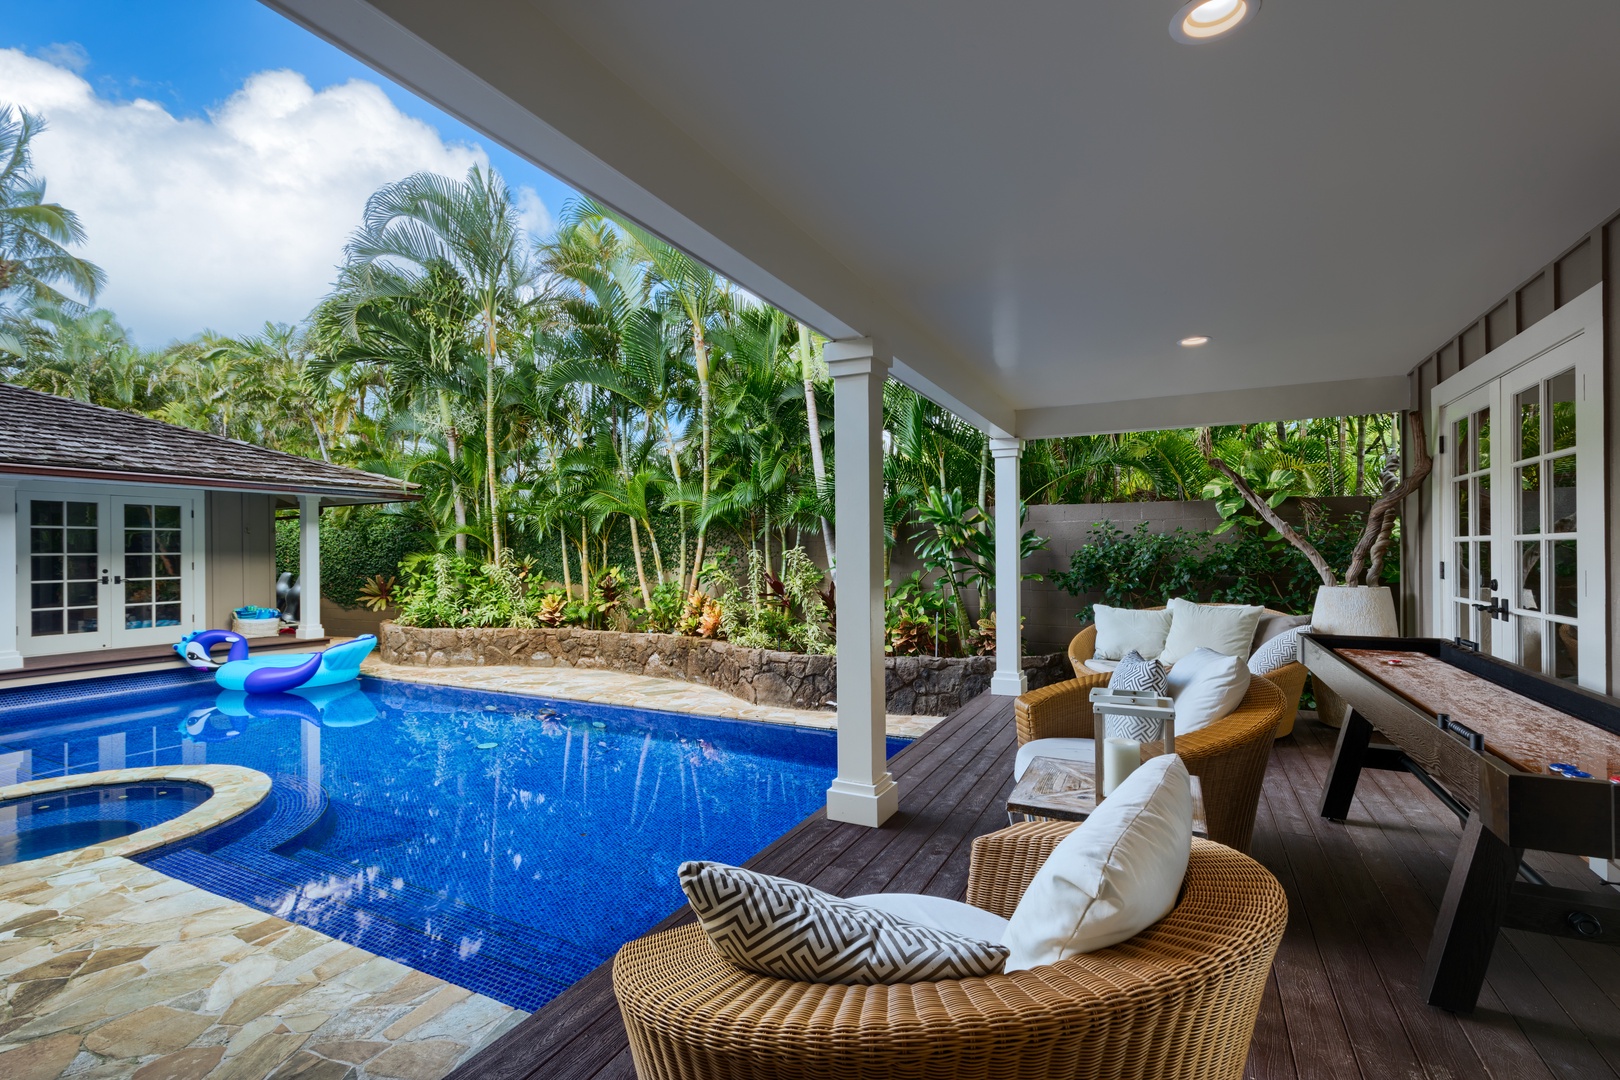 Honolulu Vacation Rentals, Moana Lani - Your private pool, complete with a shuffle board for ultimate entertainment!